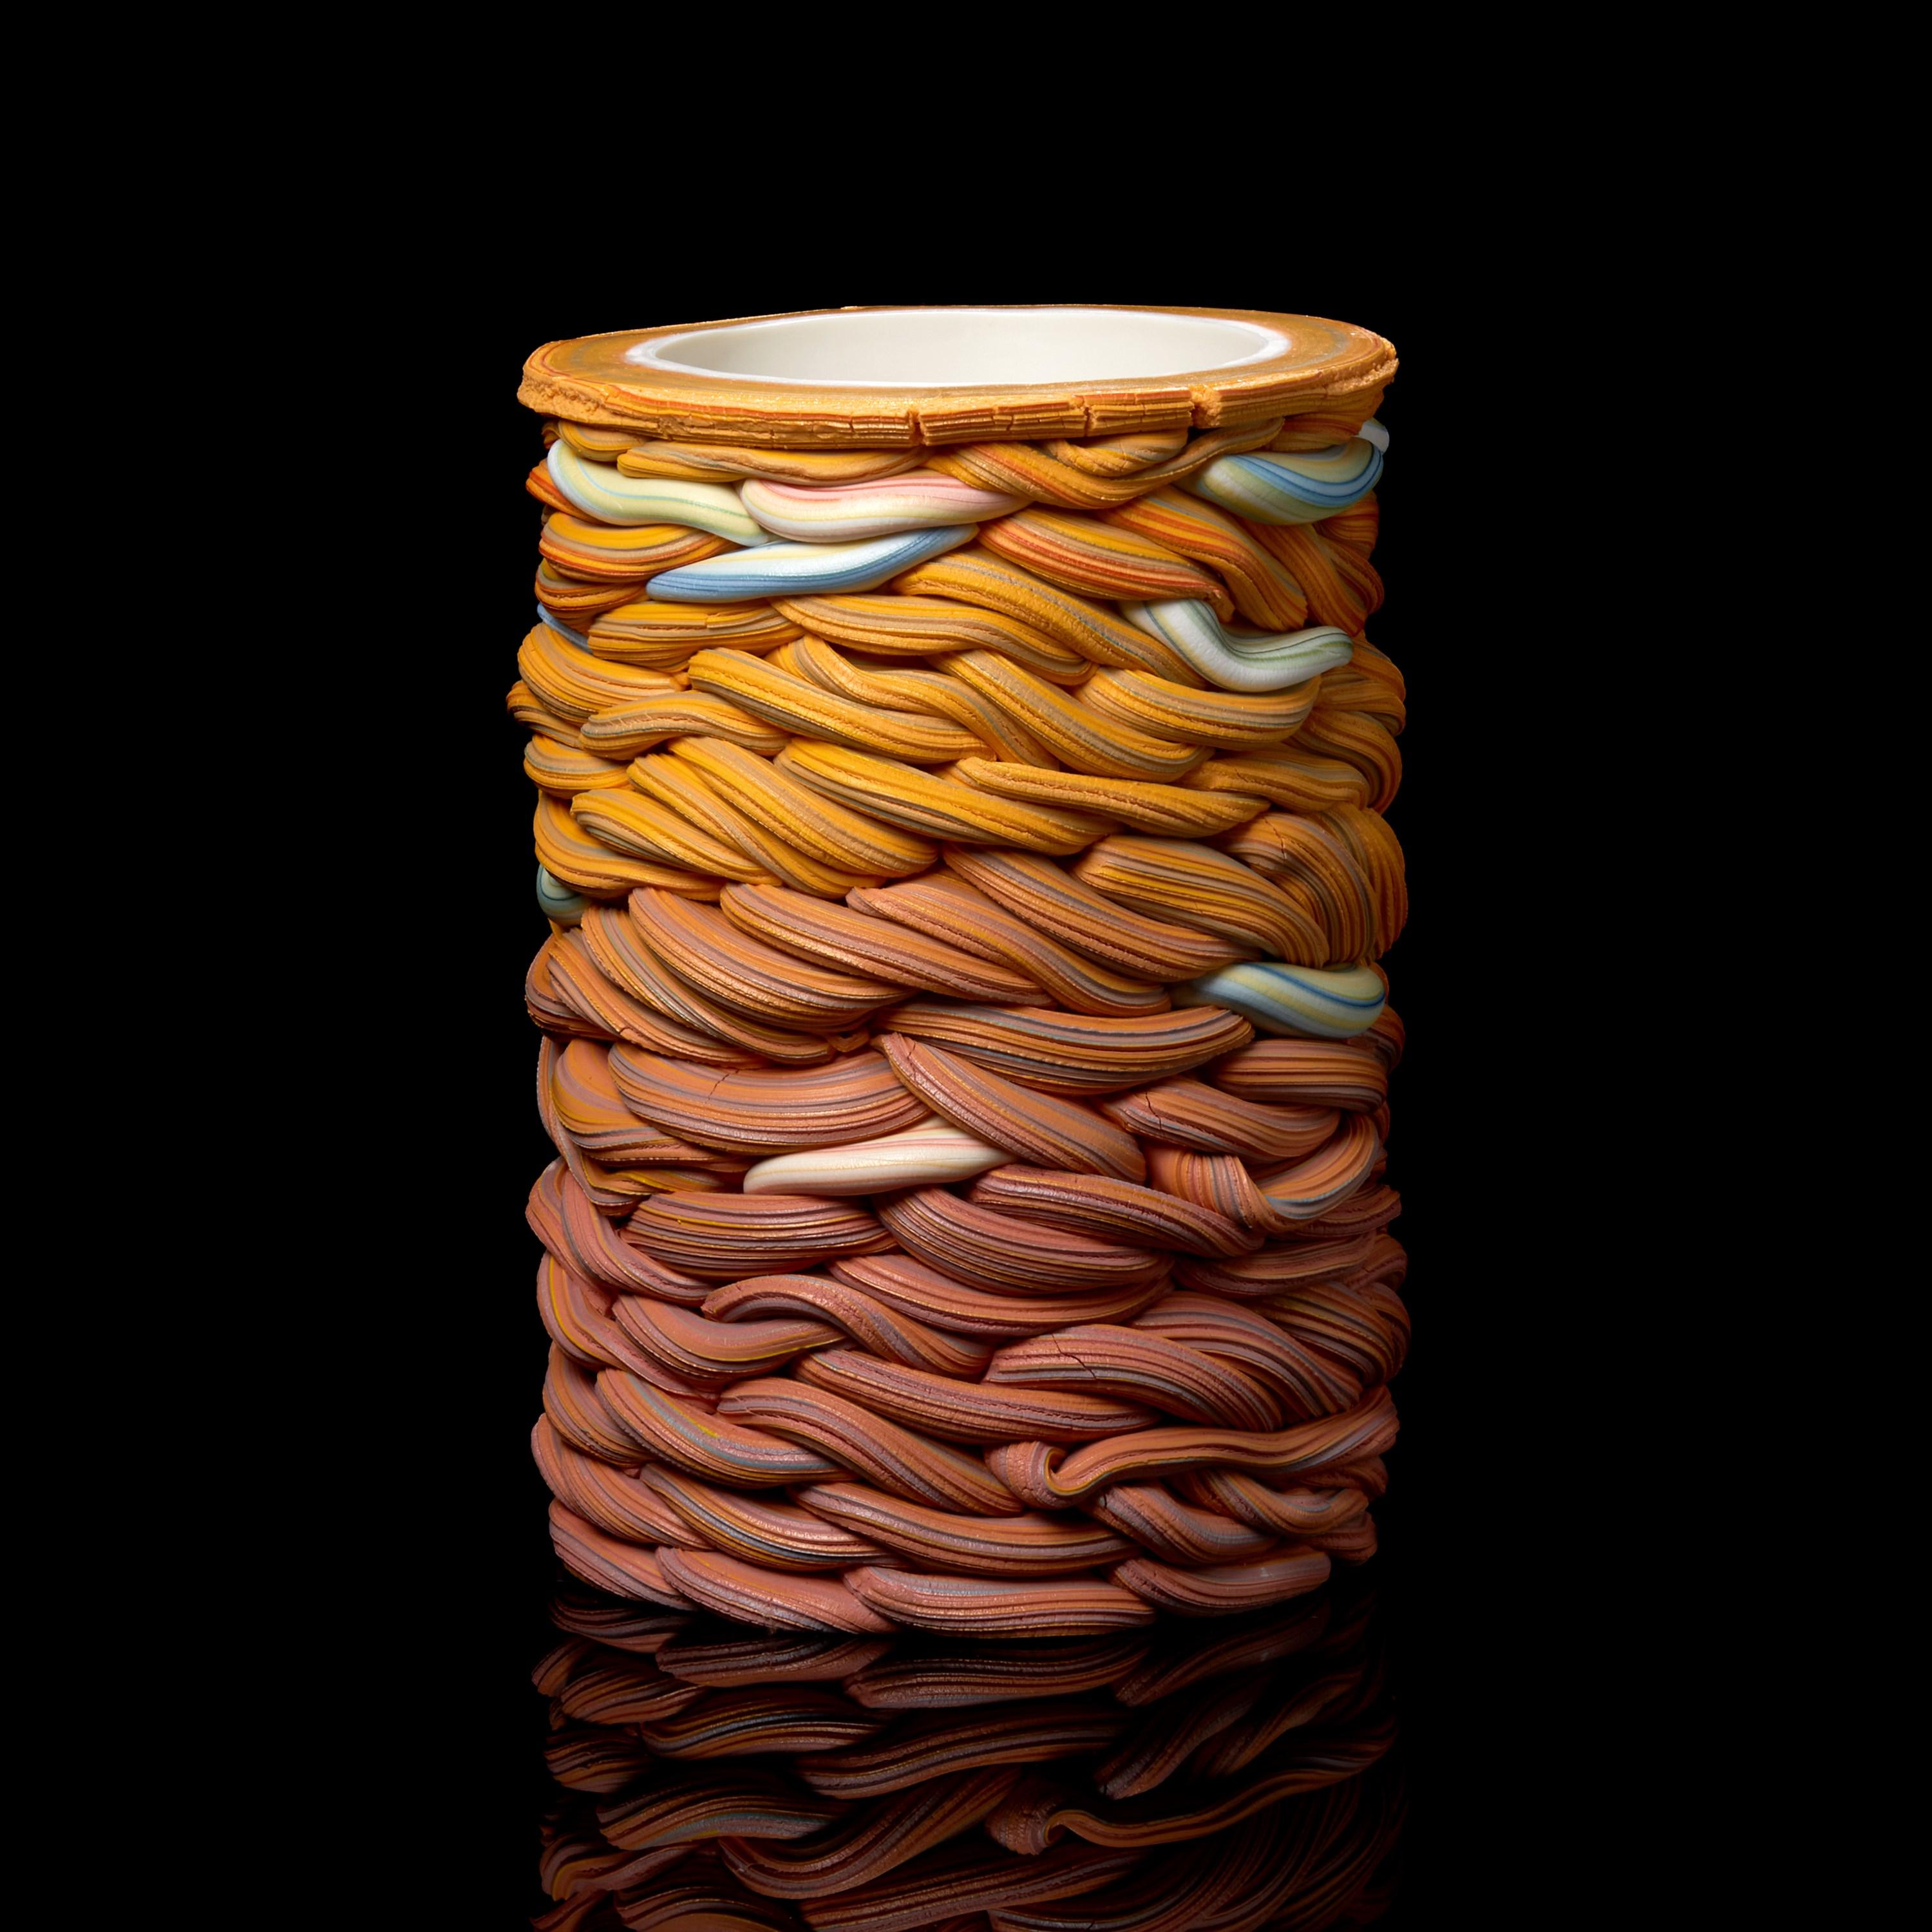 Organic Modern Striped Fold II, Mixed Colour Porcelain Sculptural Vessel by Steven Edwards For Sale